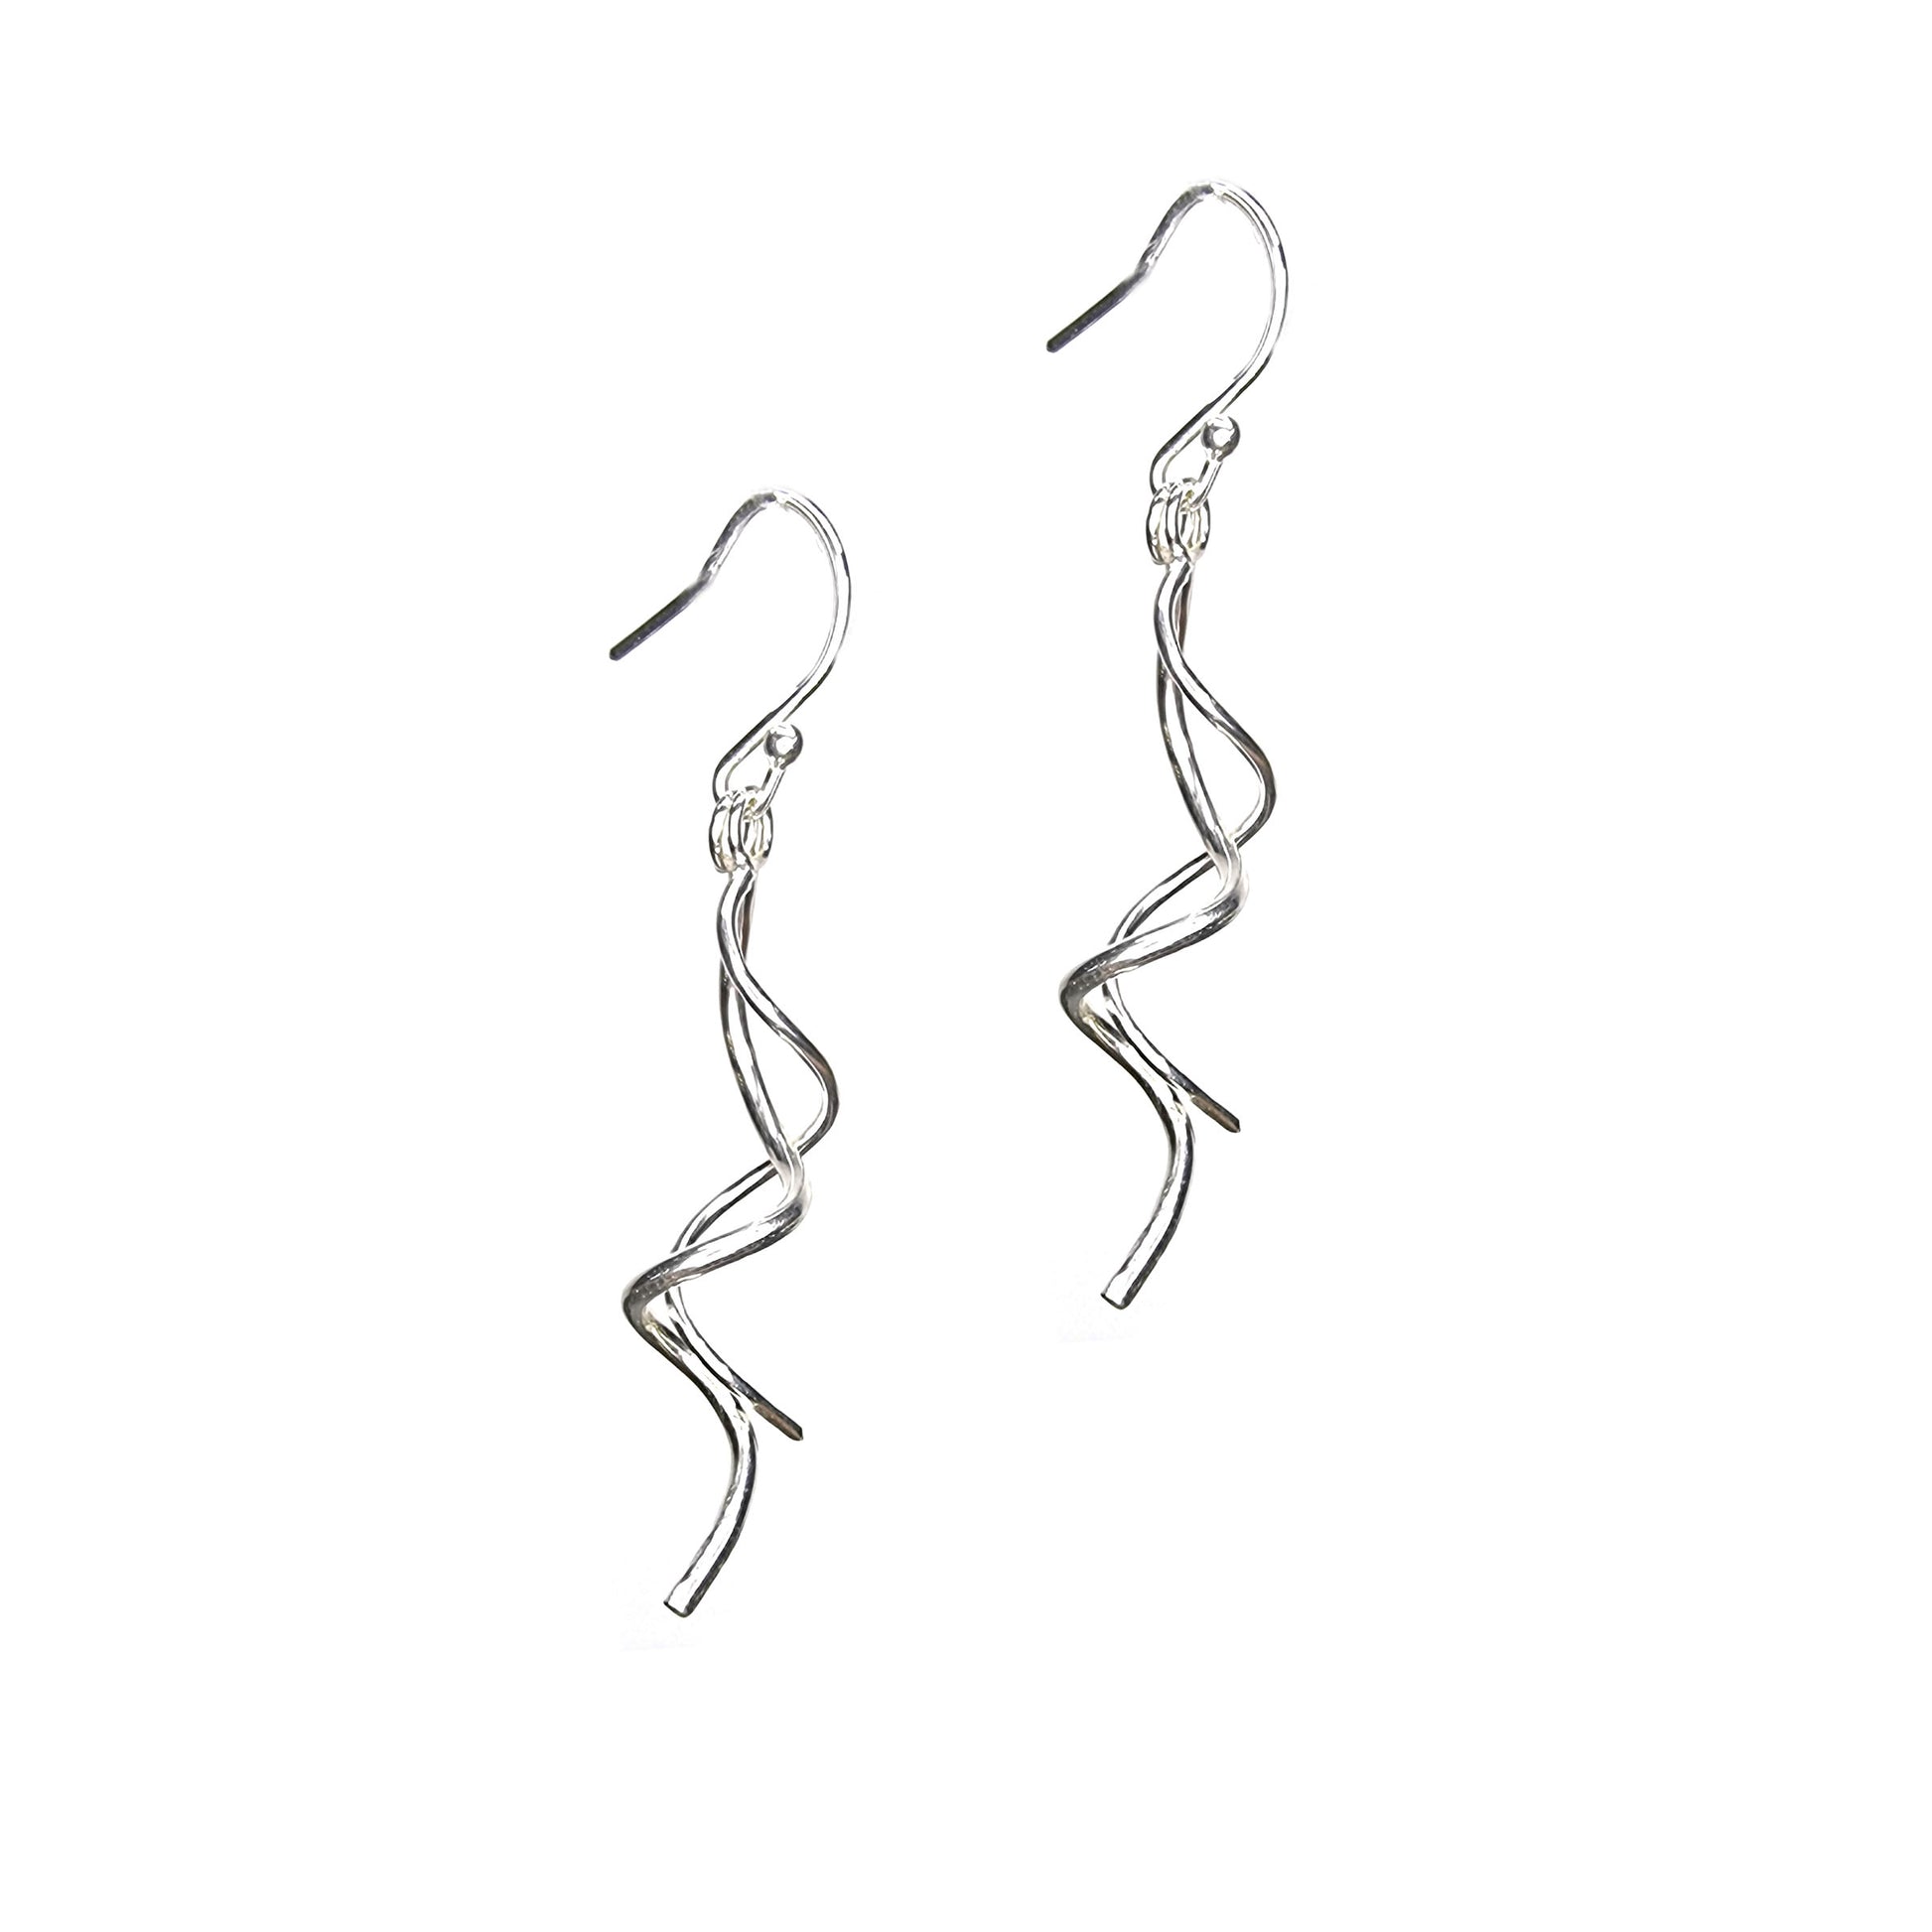 Silver spiral drop earrings featuring 2 curled strands intertwined.